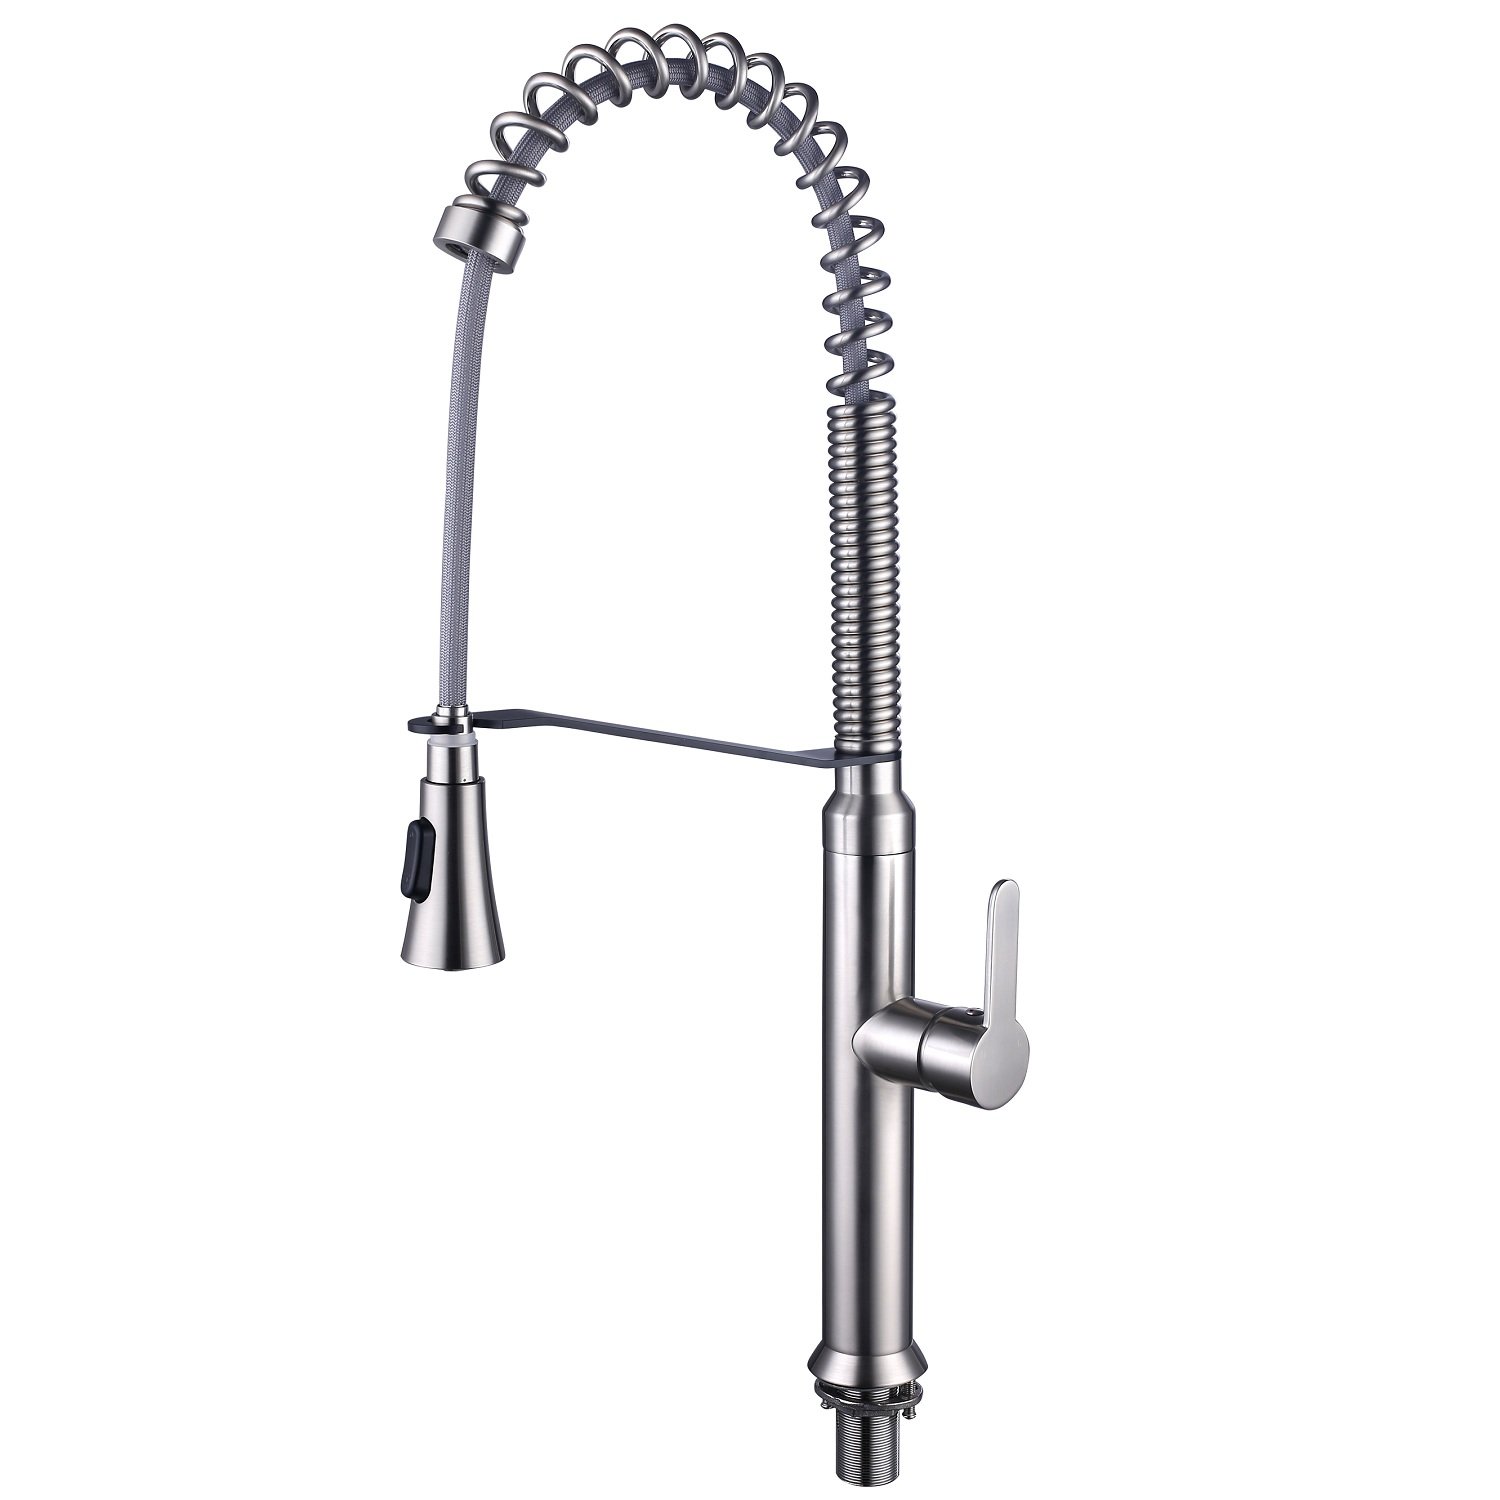 CASAINC Single Handle Kitchen Faucet with Pull Down Sprayer in Brushed Nickel-CASAINC